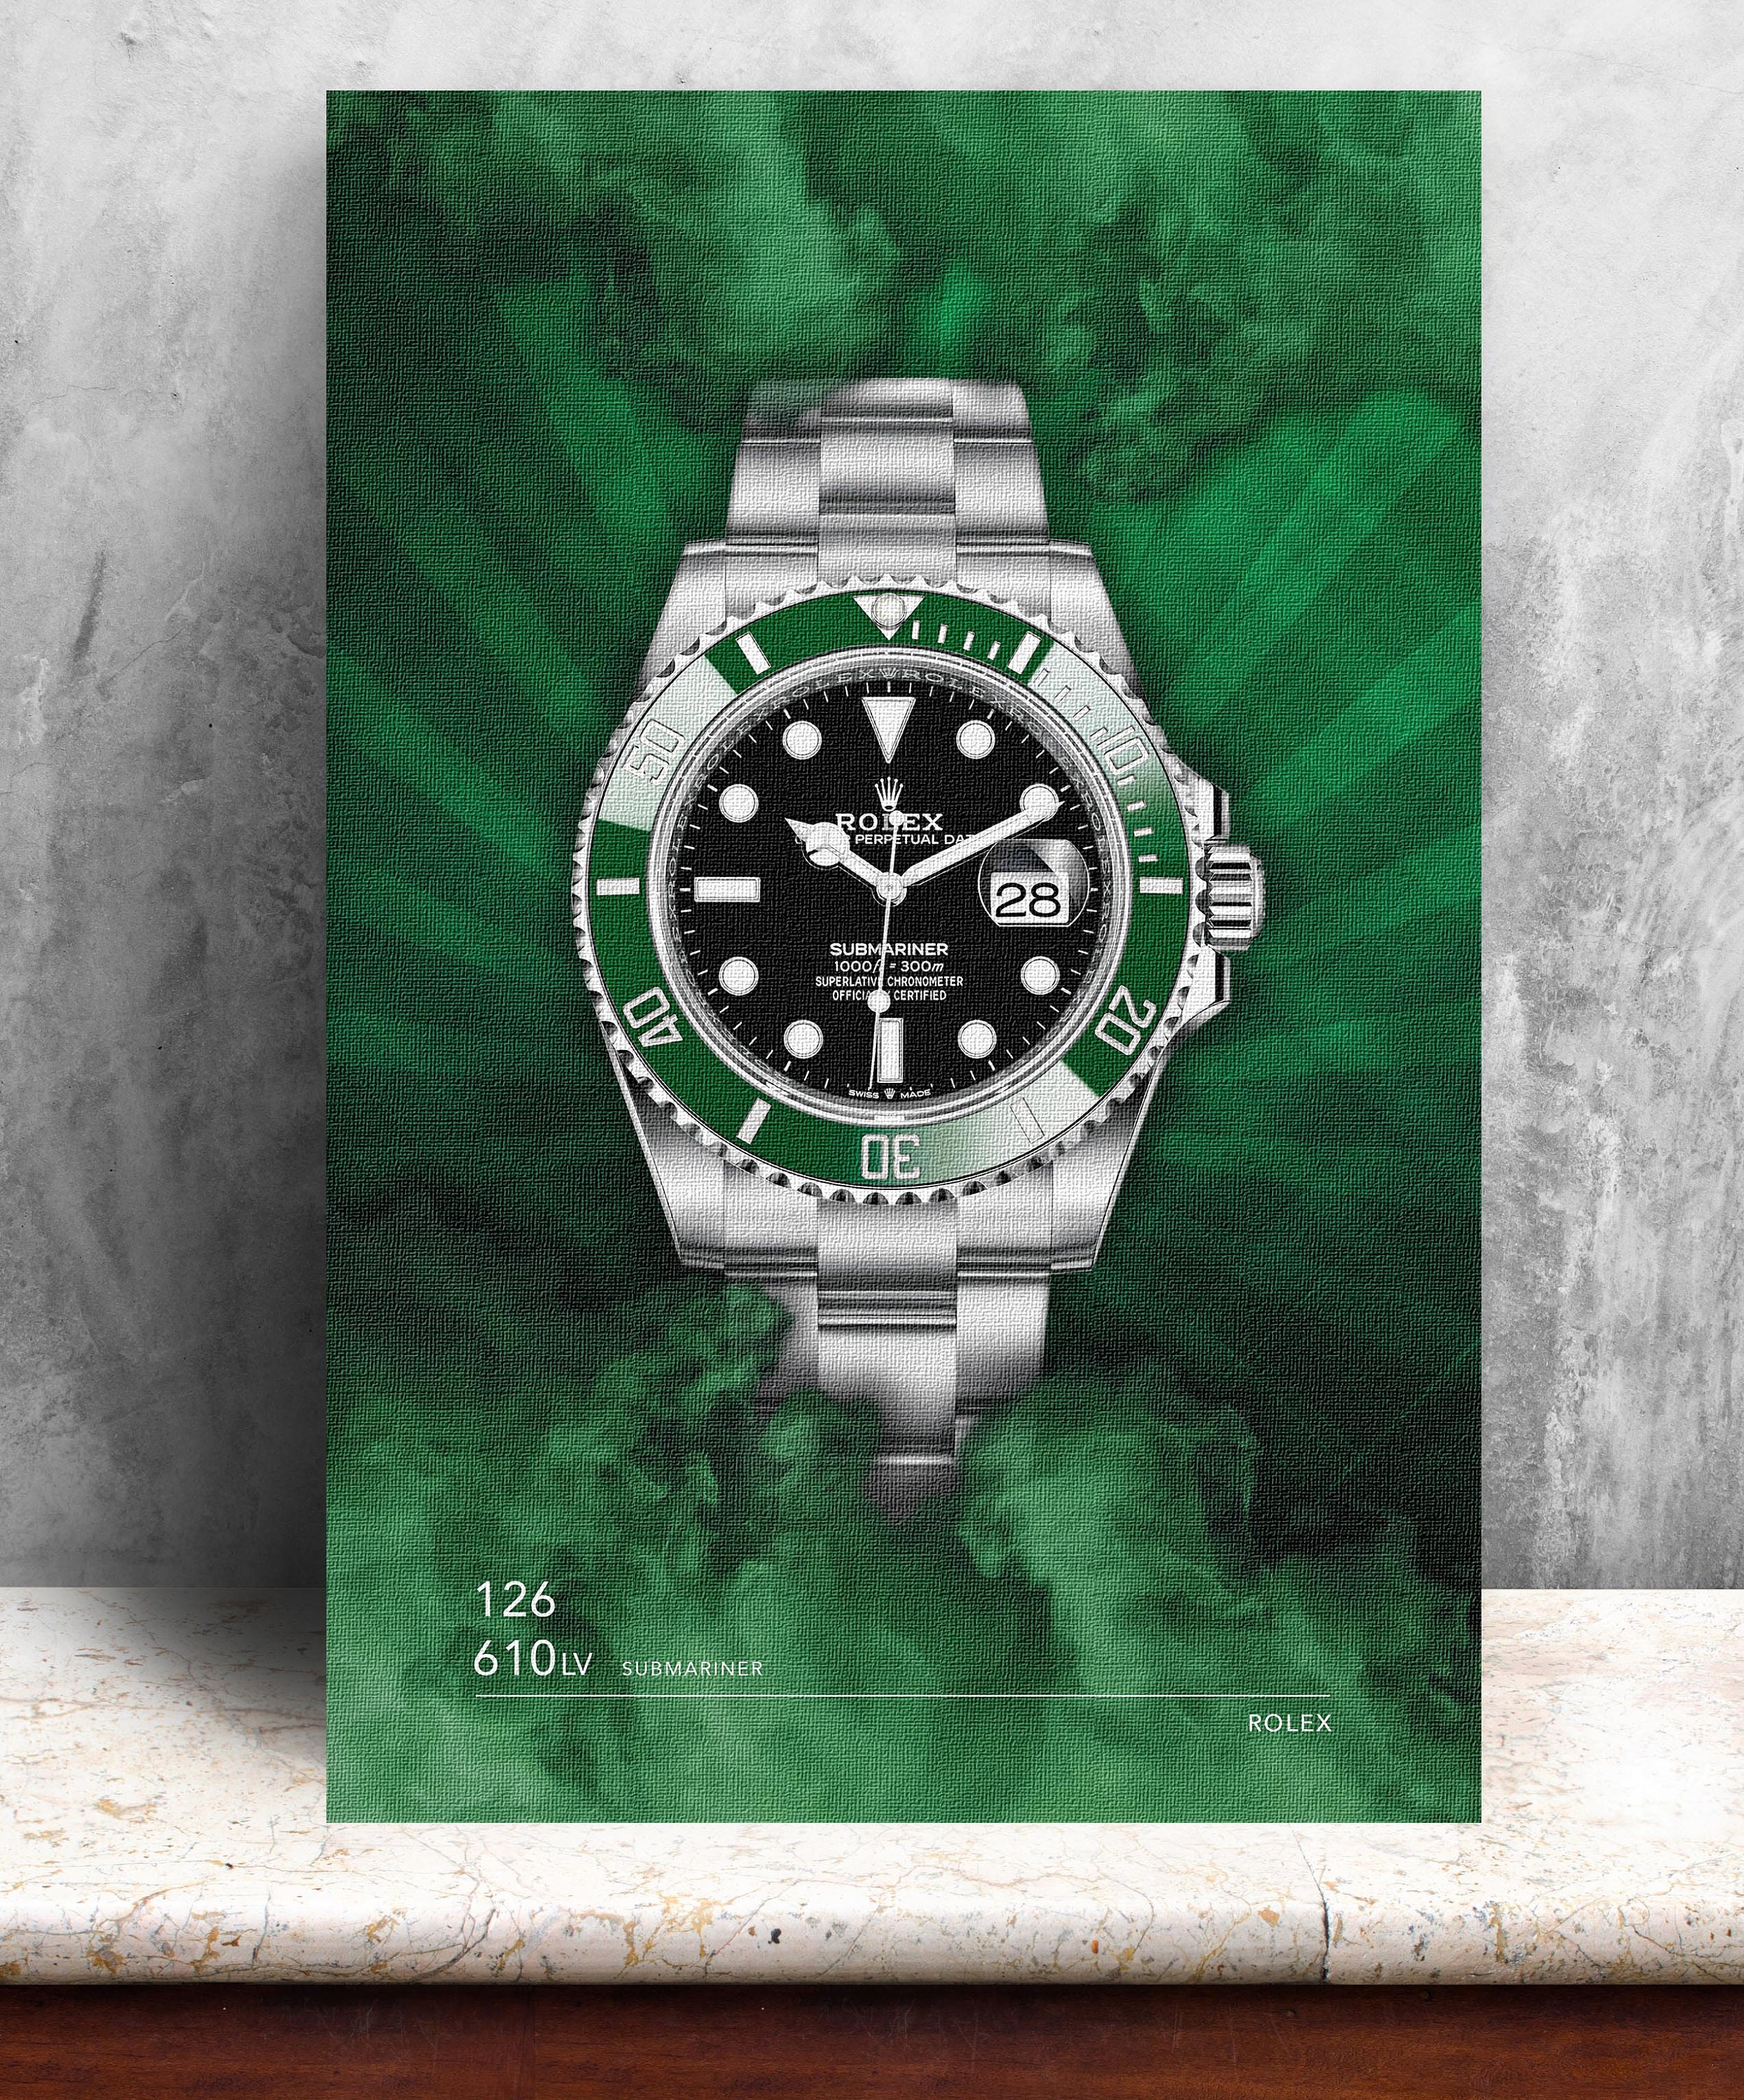 Rolex SUBMARINER-126610LV Watch Print on Canvas. Bold Graphic - Etsy